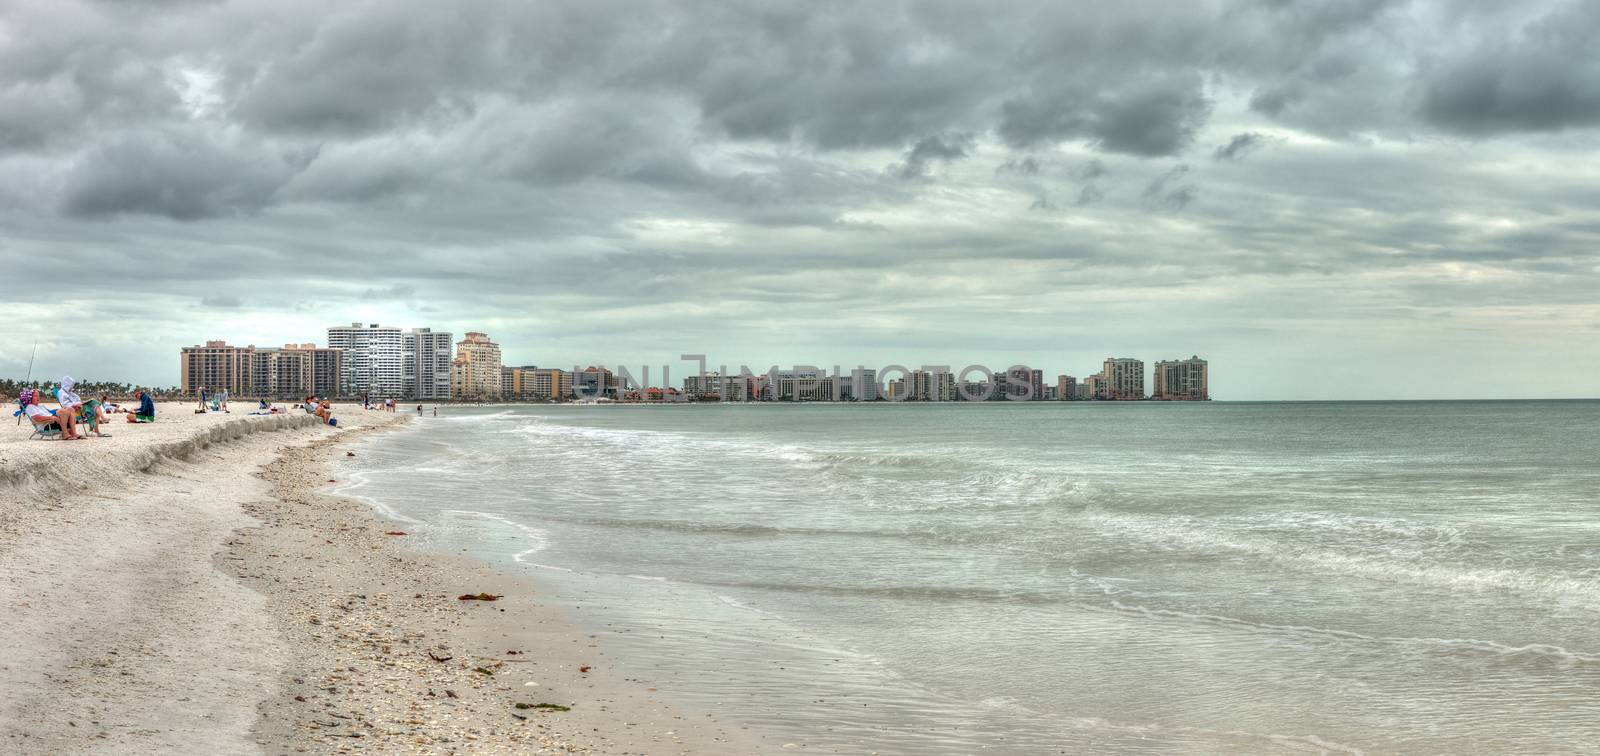 Buildings in the distance on Marco Island, Florida, beach under an overcast sky in winter